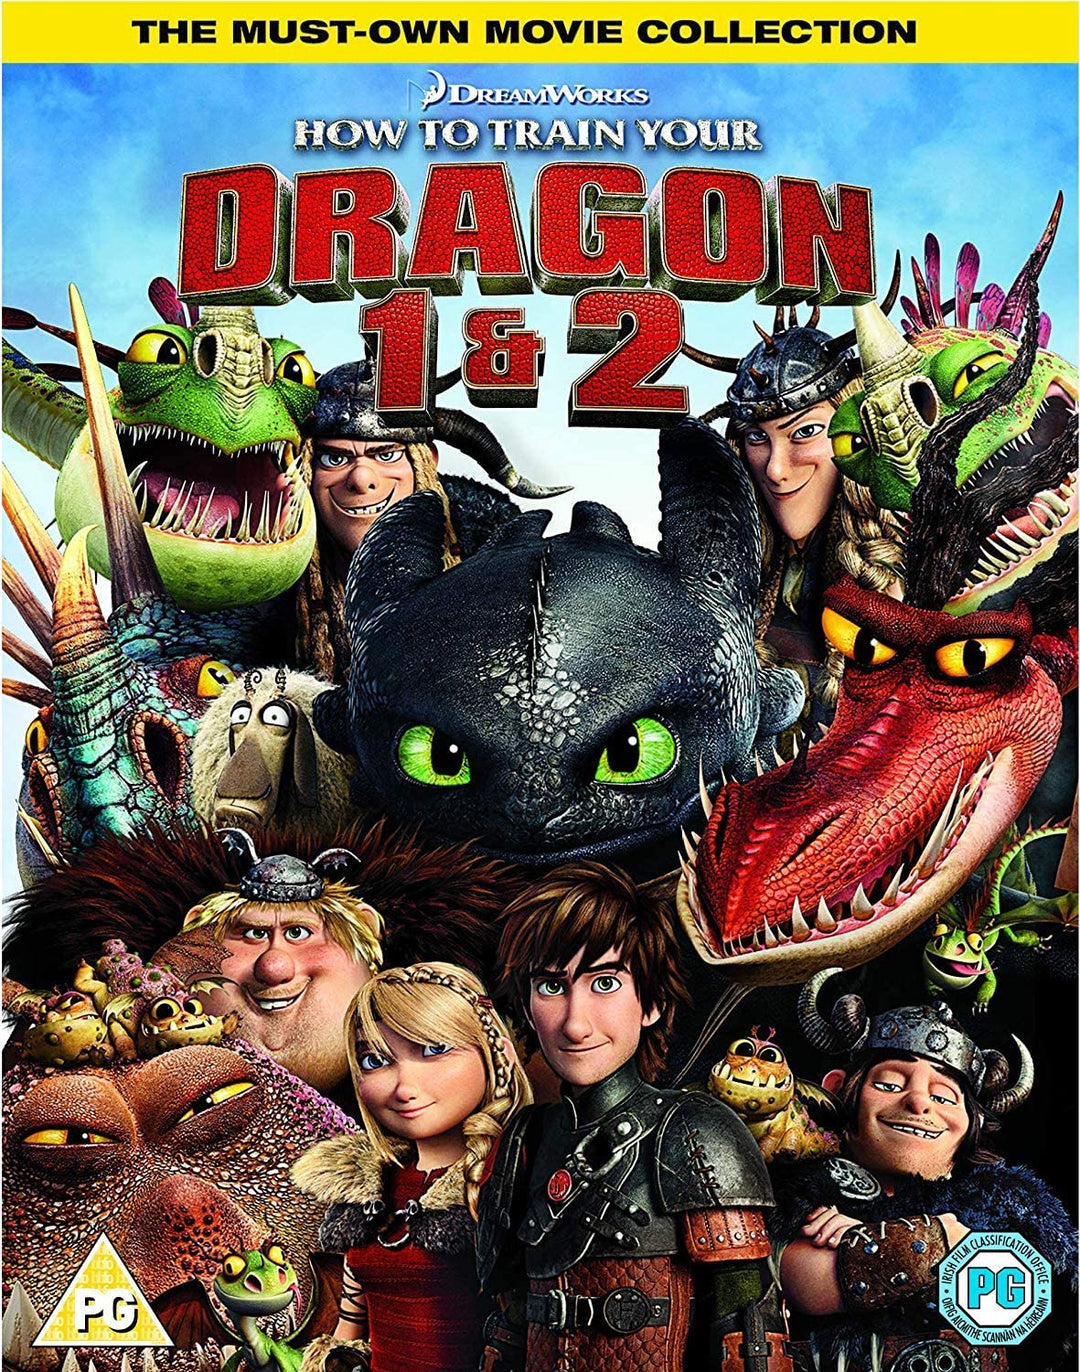 How To Train Your Dragon 1 & 2 Box Set - Family/Adventure [DVD]